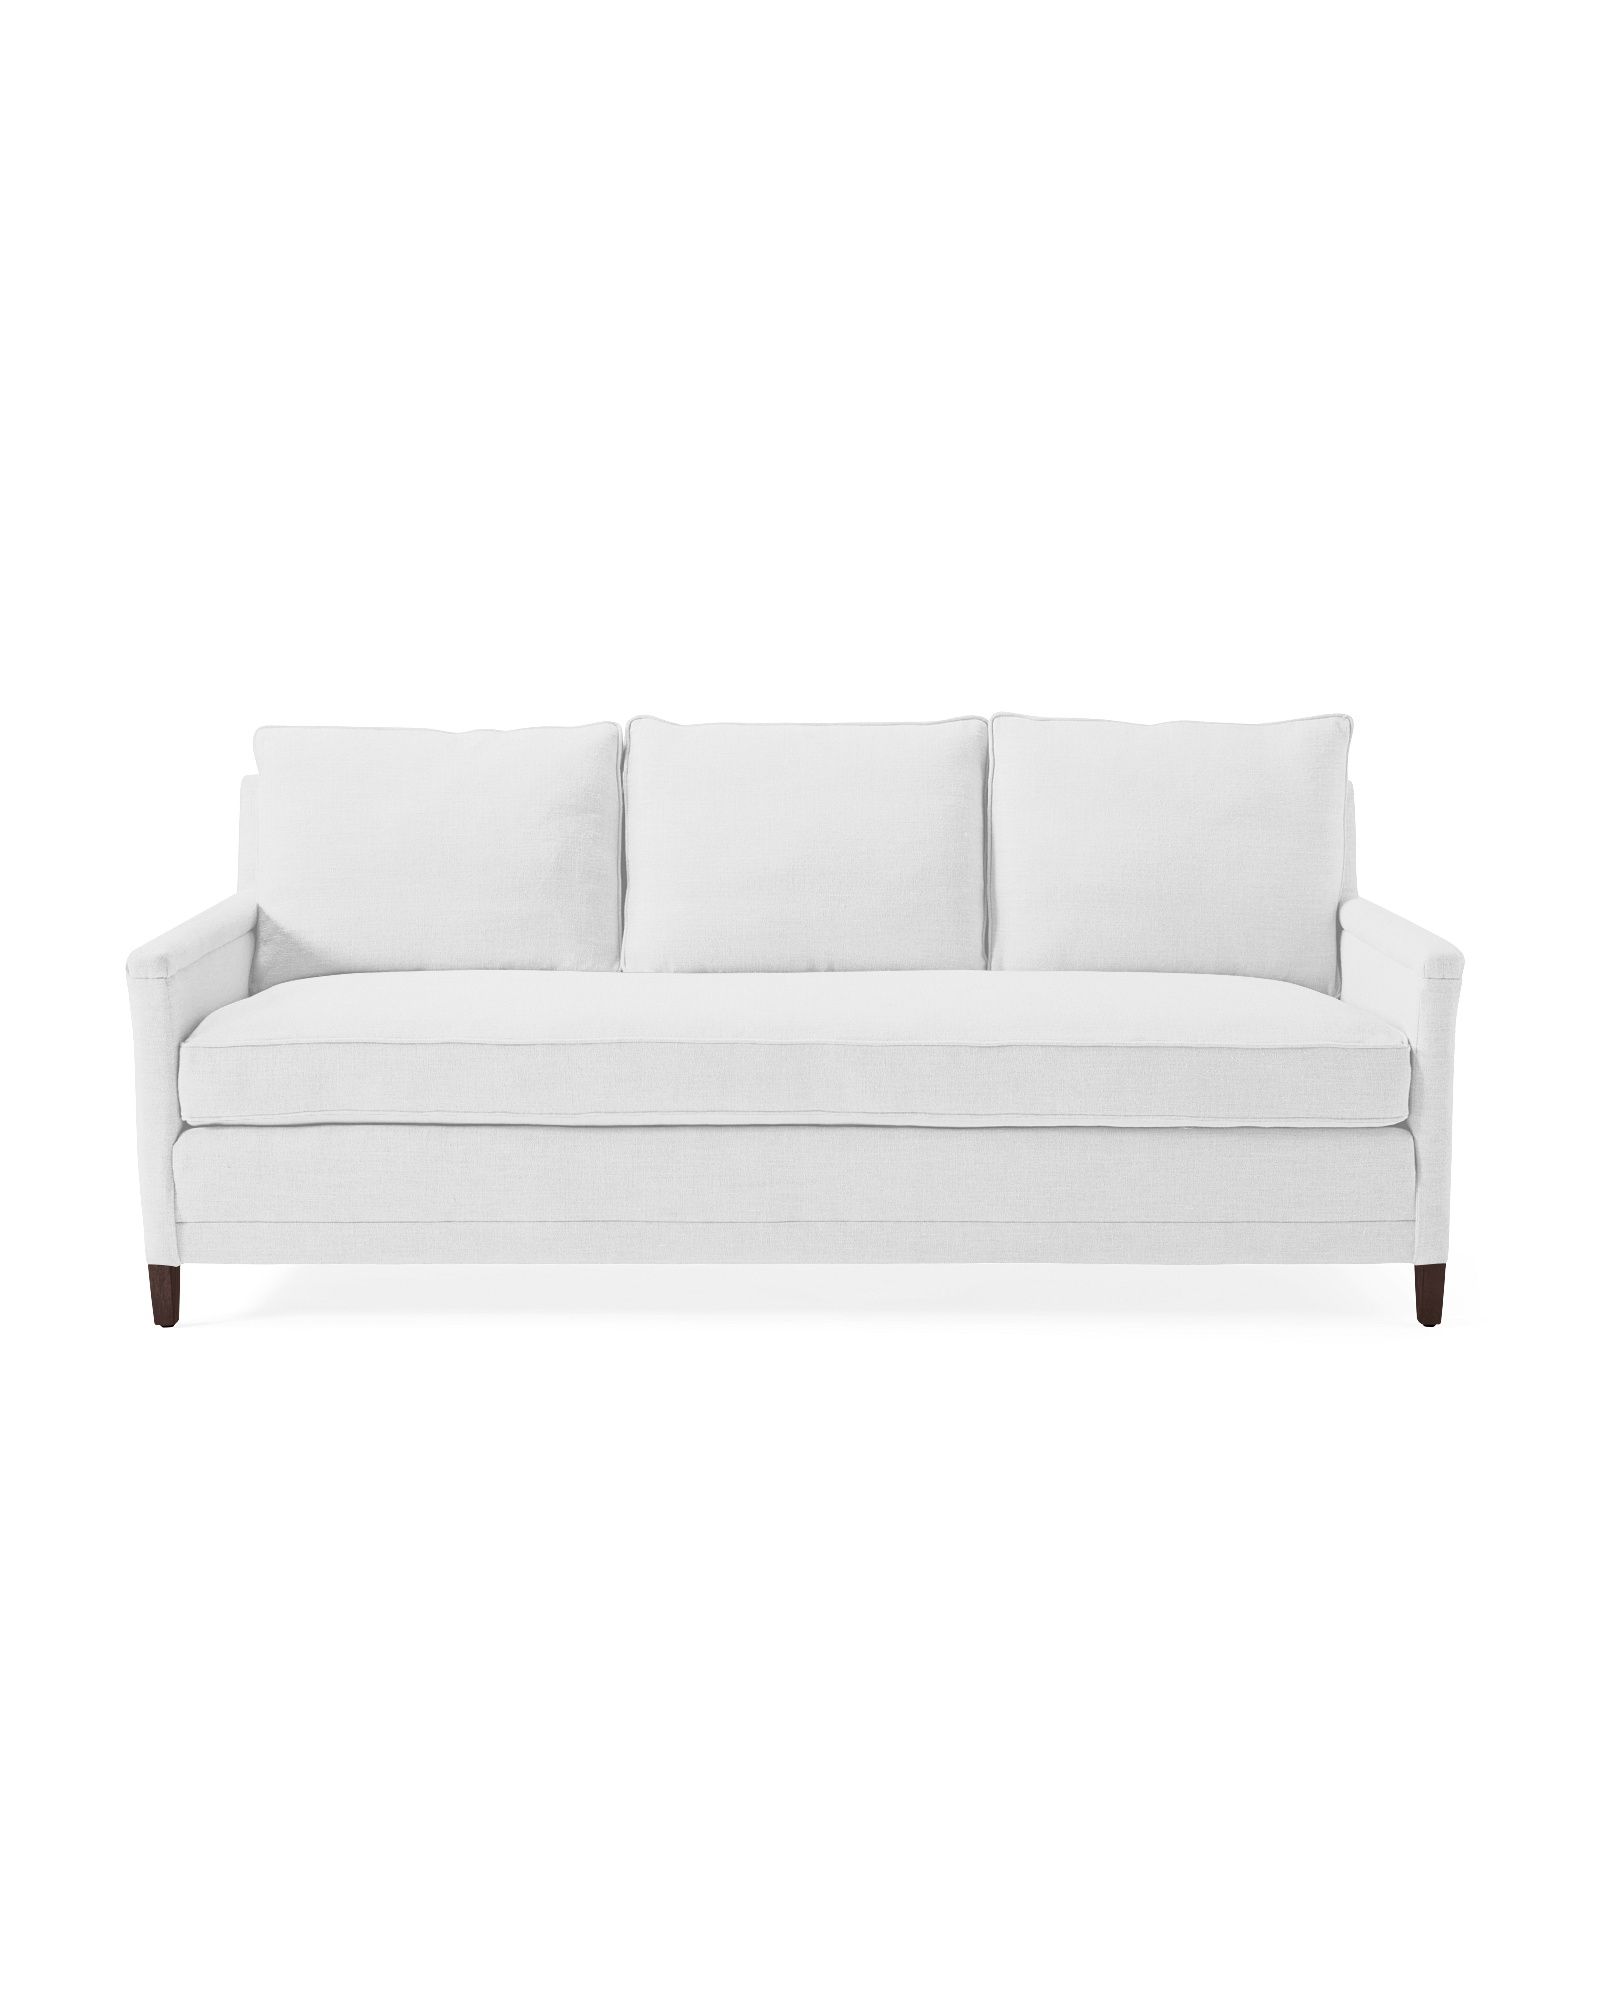 Spruce Street 3-Seat Sofa with Bench Seat | Serena and Lily